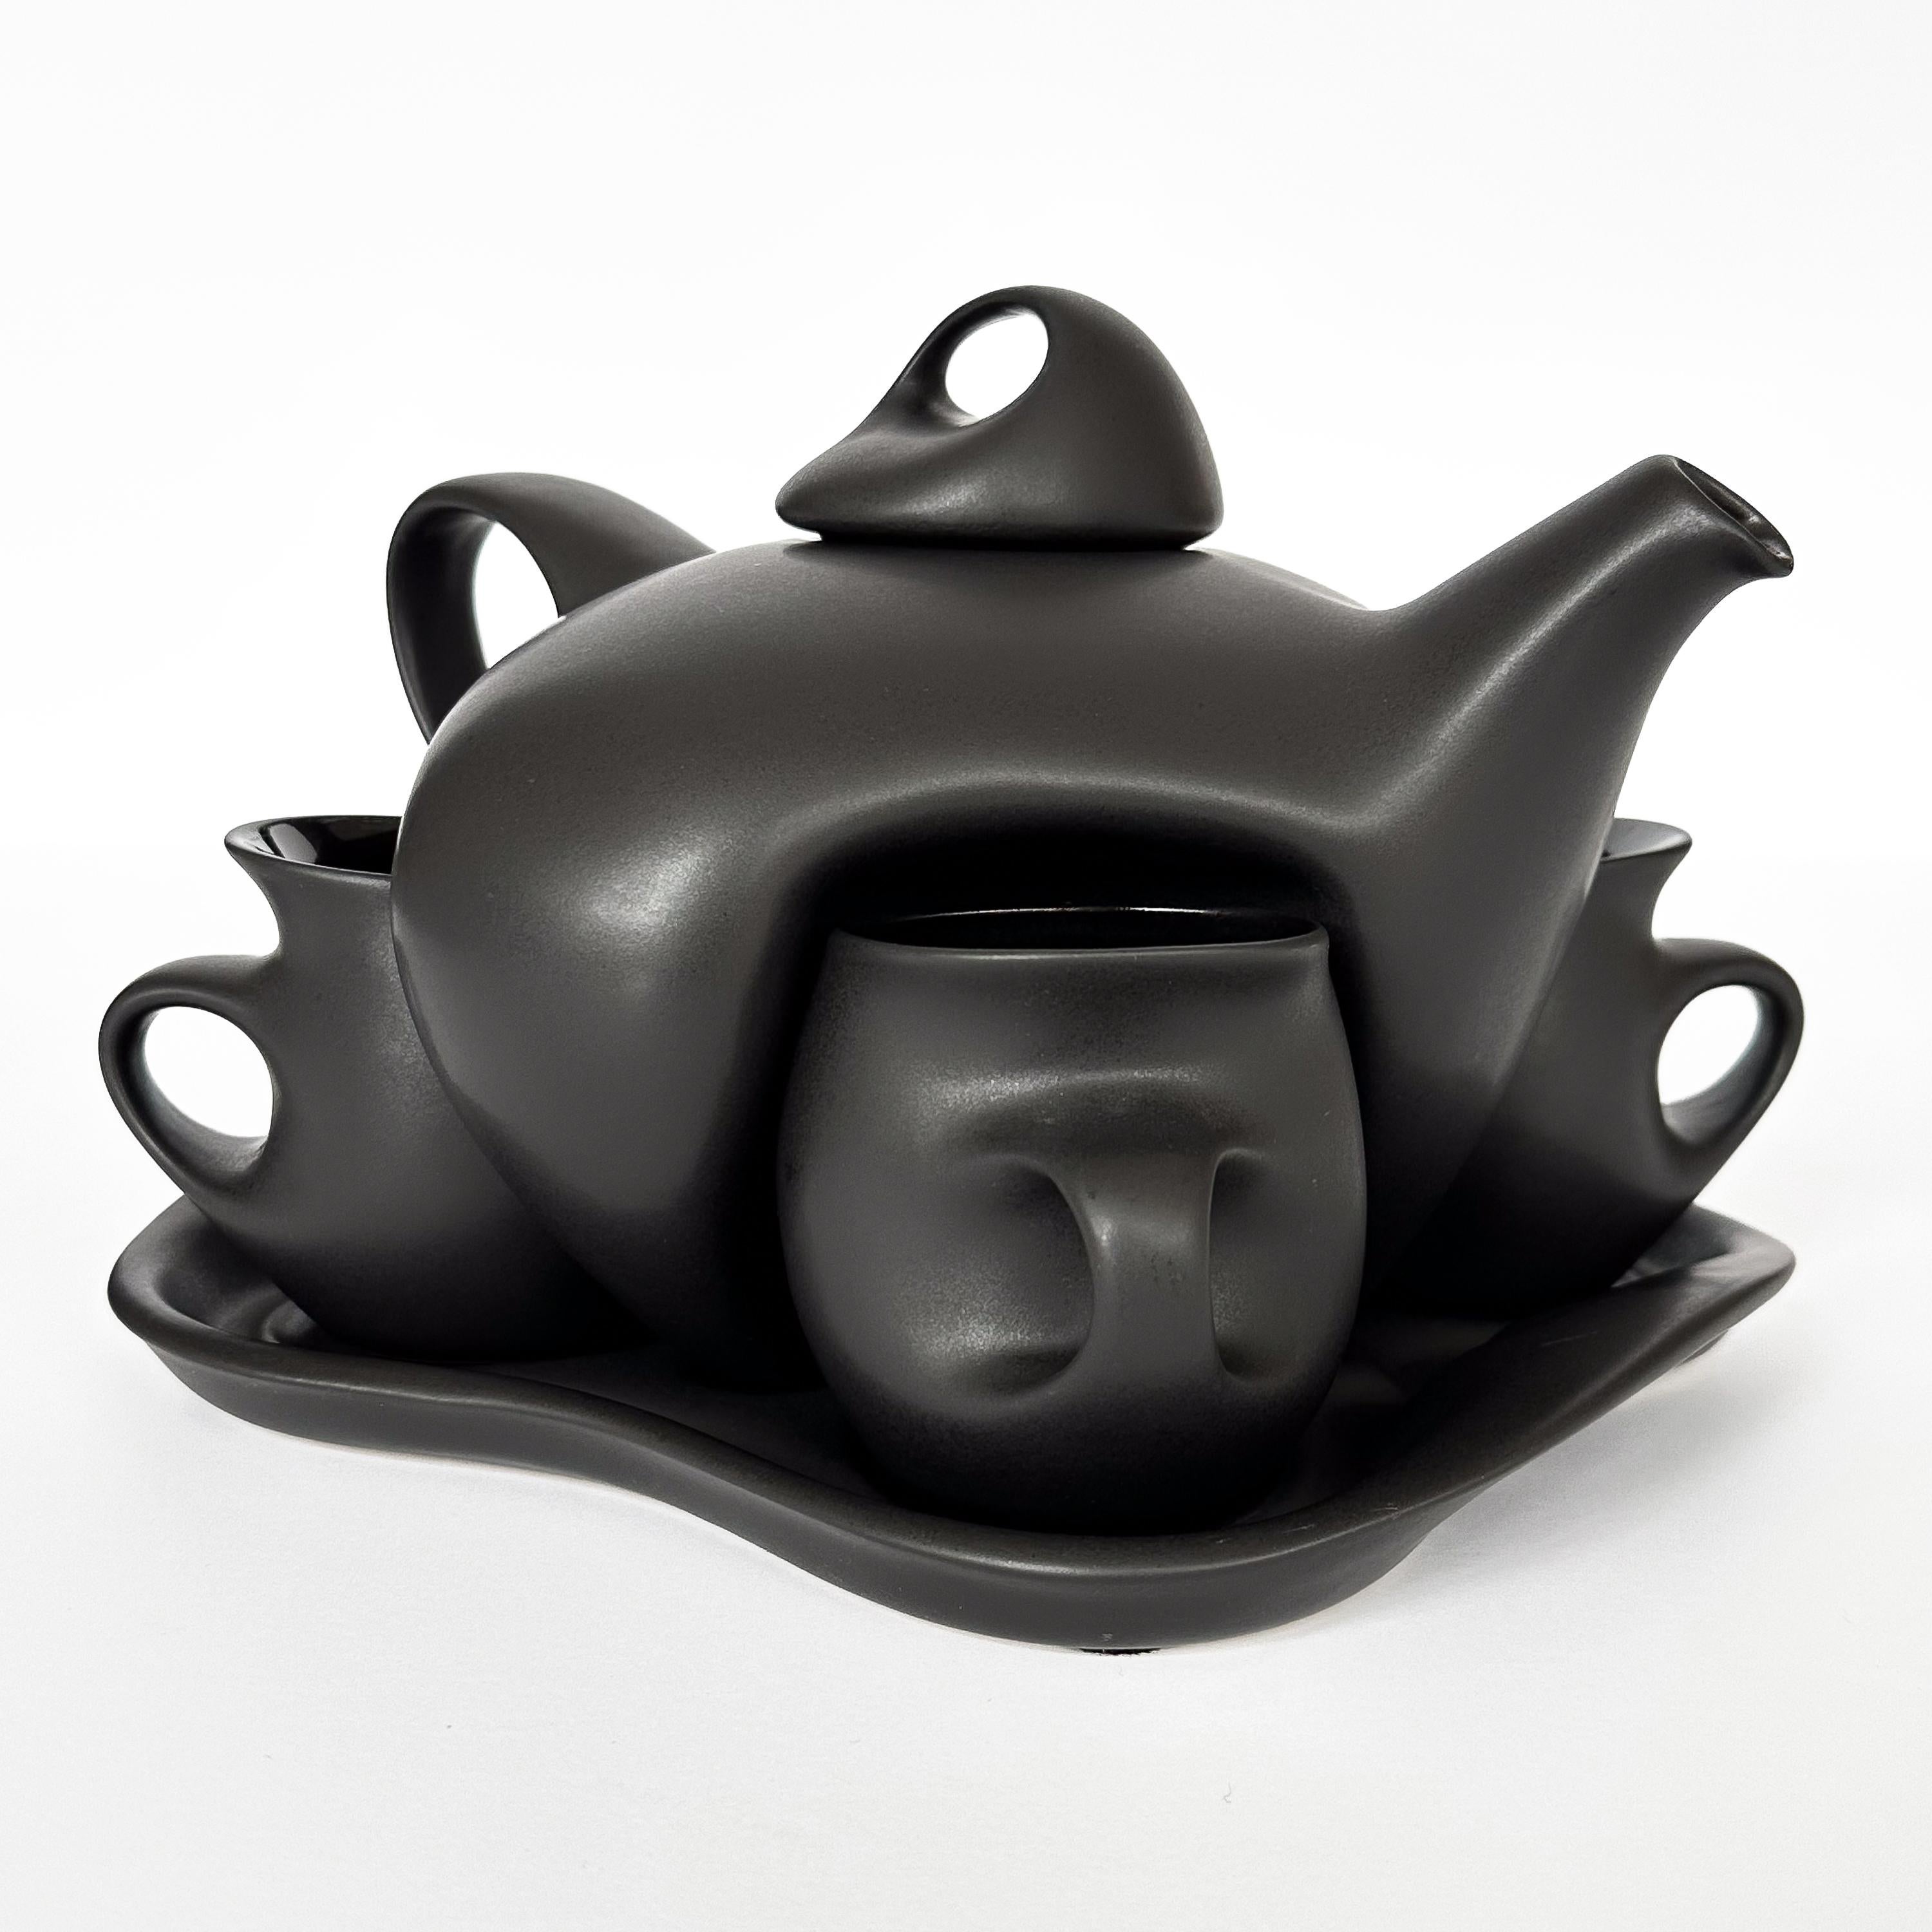 Embrace a distinctive blend of art and function with this striking black glazed ceramic tea service set, crafted by the gifted hands of Peter Saenger. His unique approach to design and form transcends the ordinary, making every sip from this set an